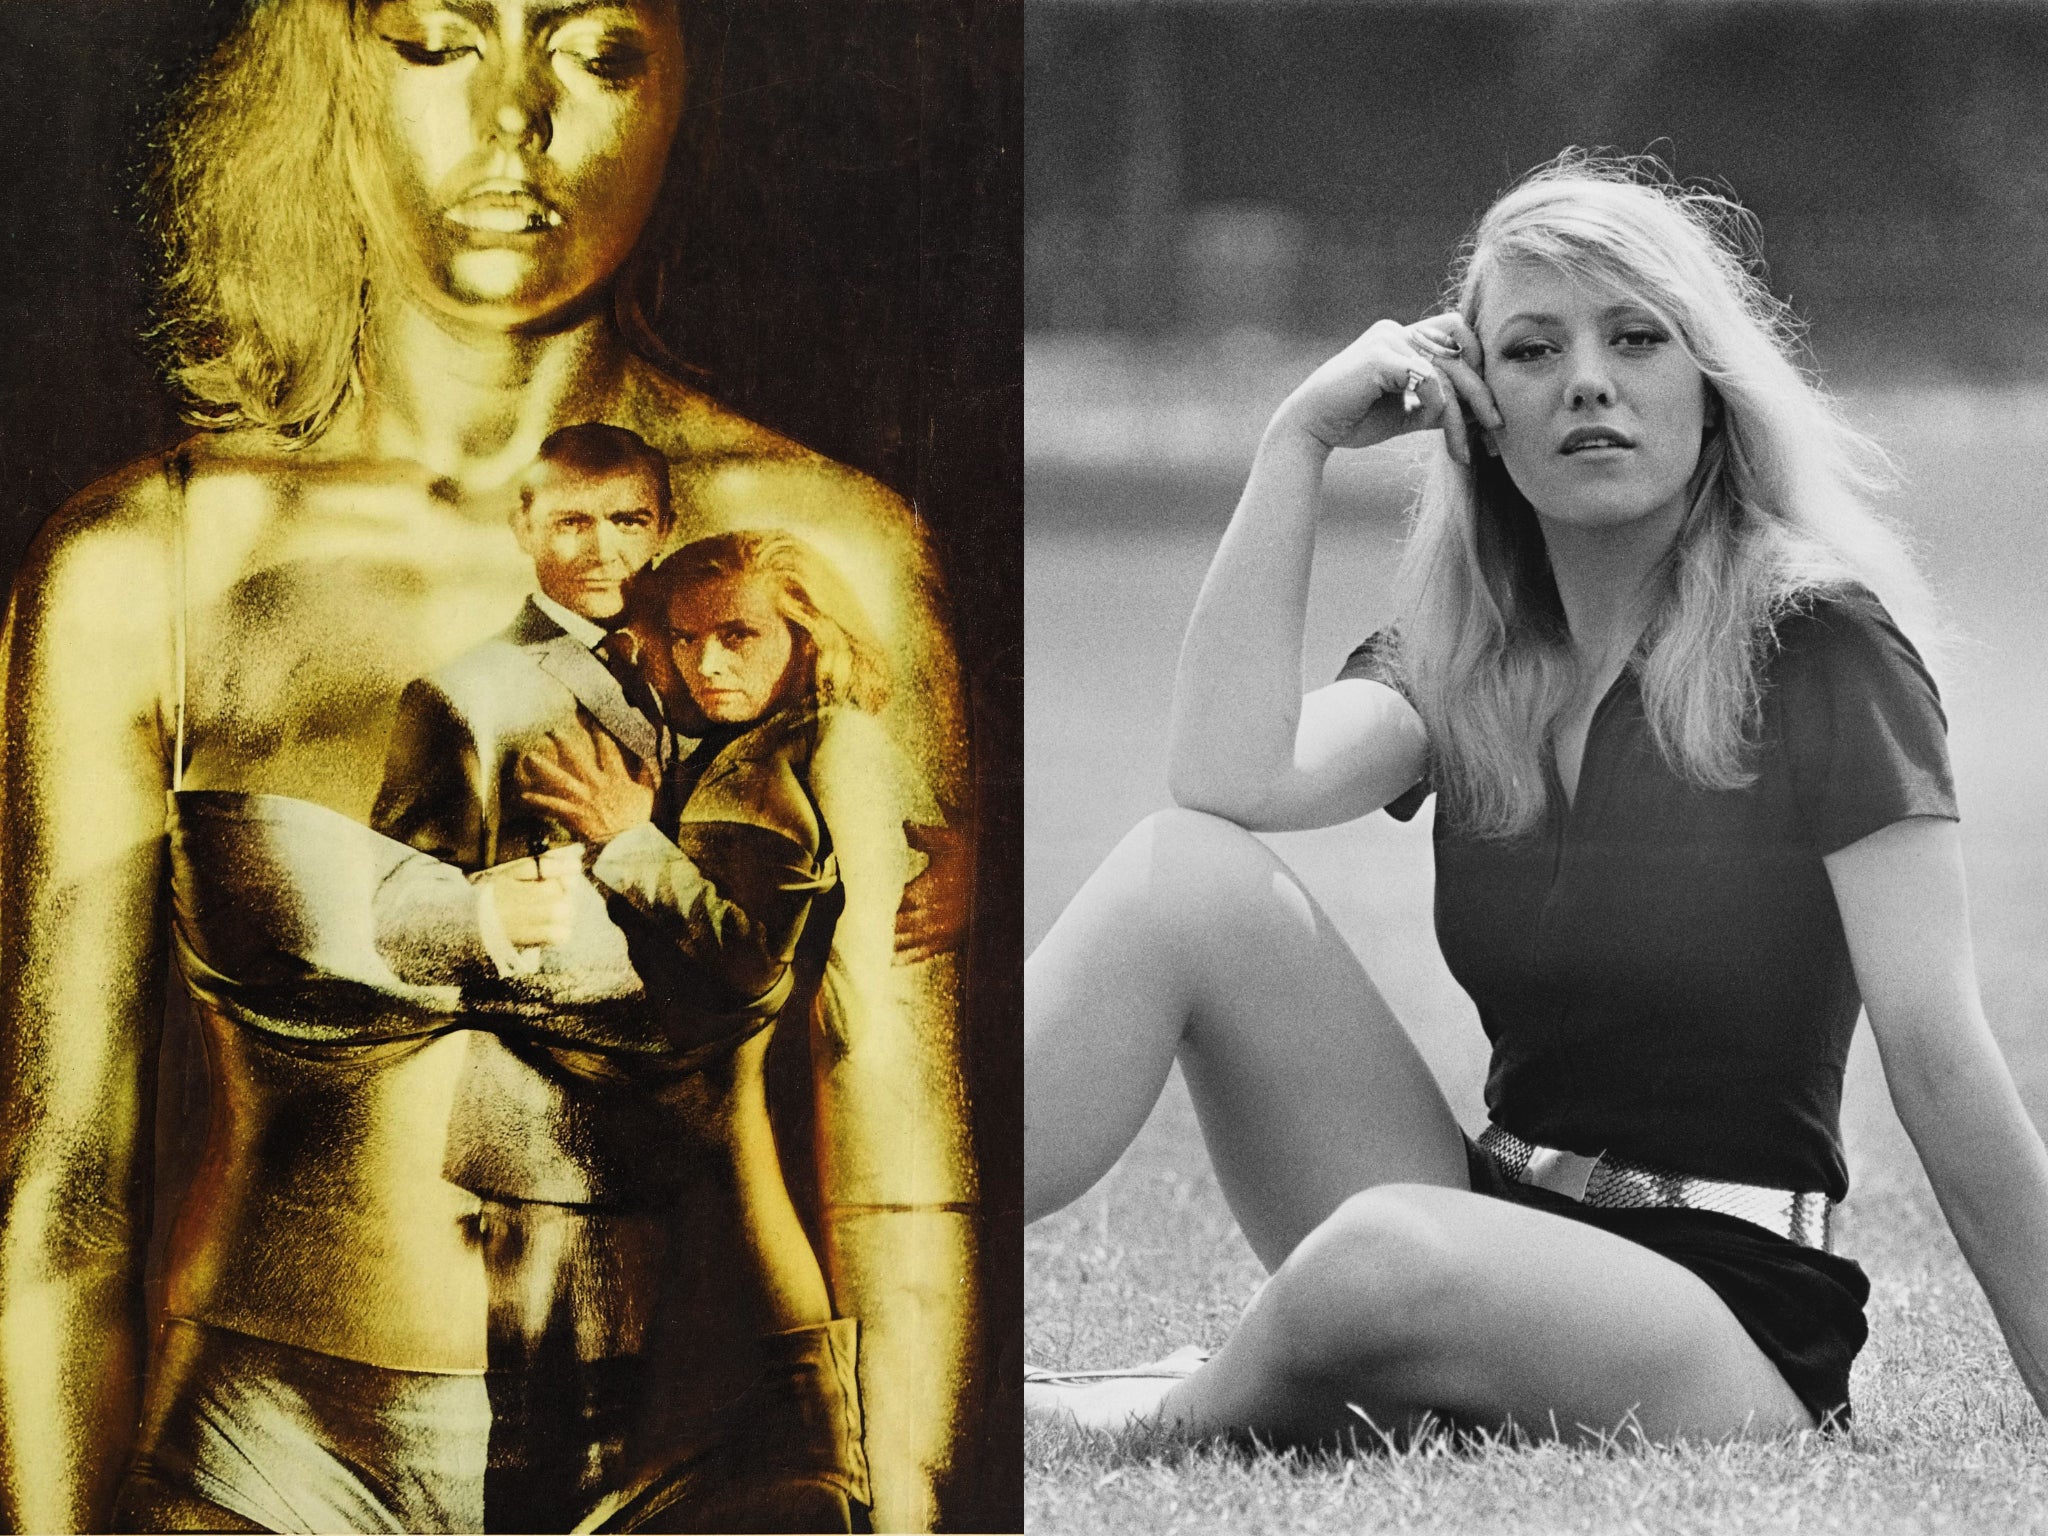 Margaret Nolan in the poster for ‘Goldfinger’ (left) and photographed in 1971 (right)